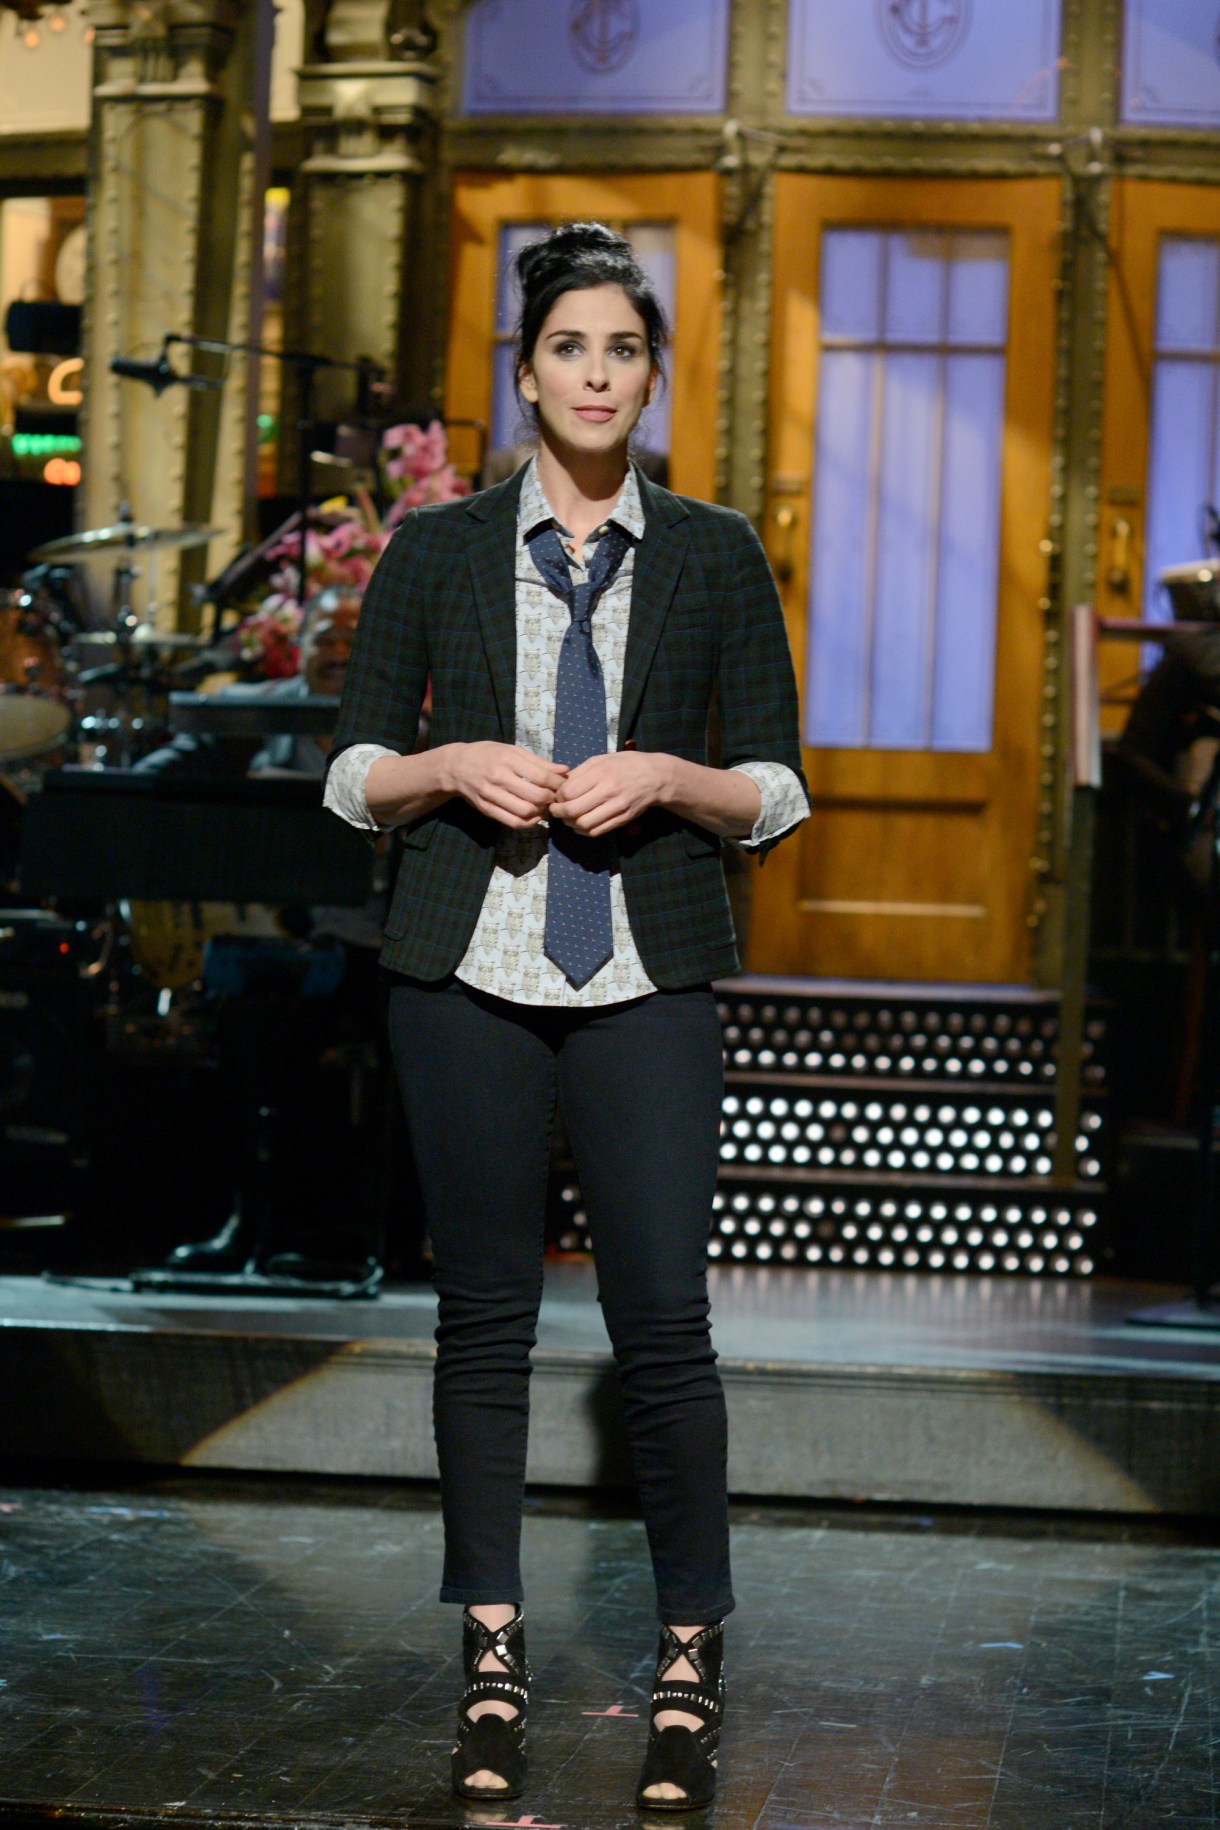 SATURDAY NIGHT LIVE -- "Sarah Silverman" Episode 1664 -- Pictured: Sarah Silverman during the opening monologue on October 4, 2014 --